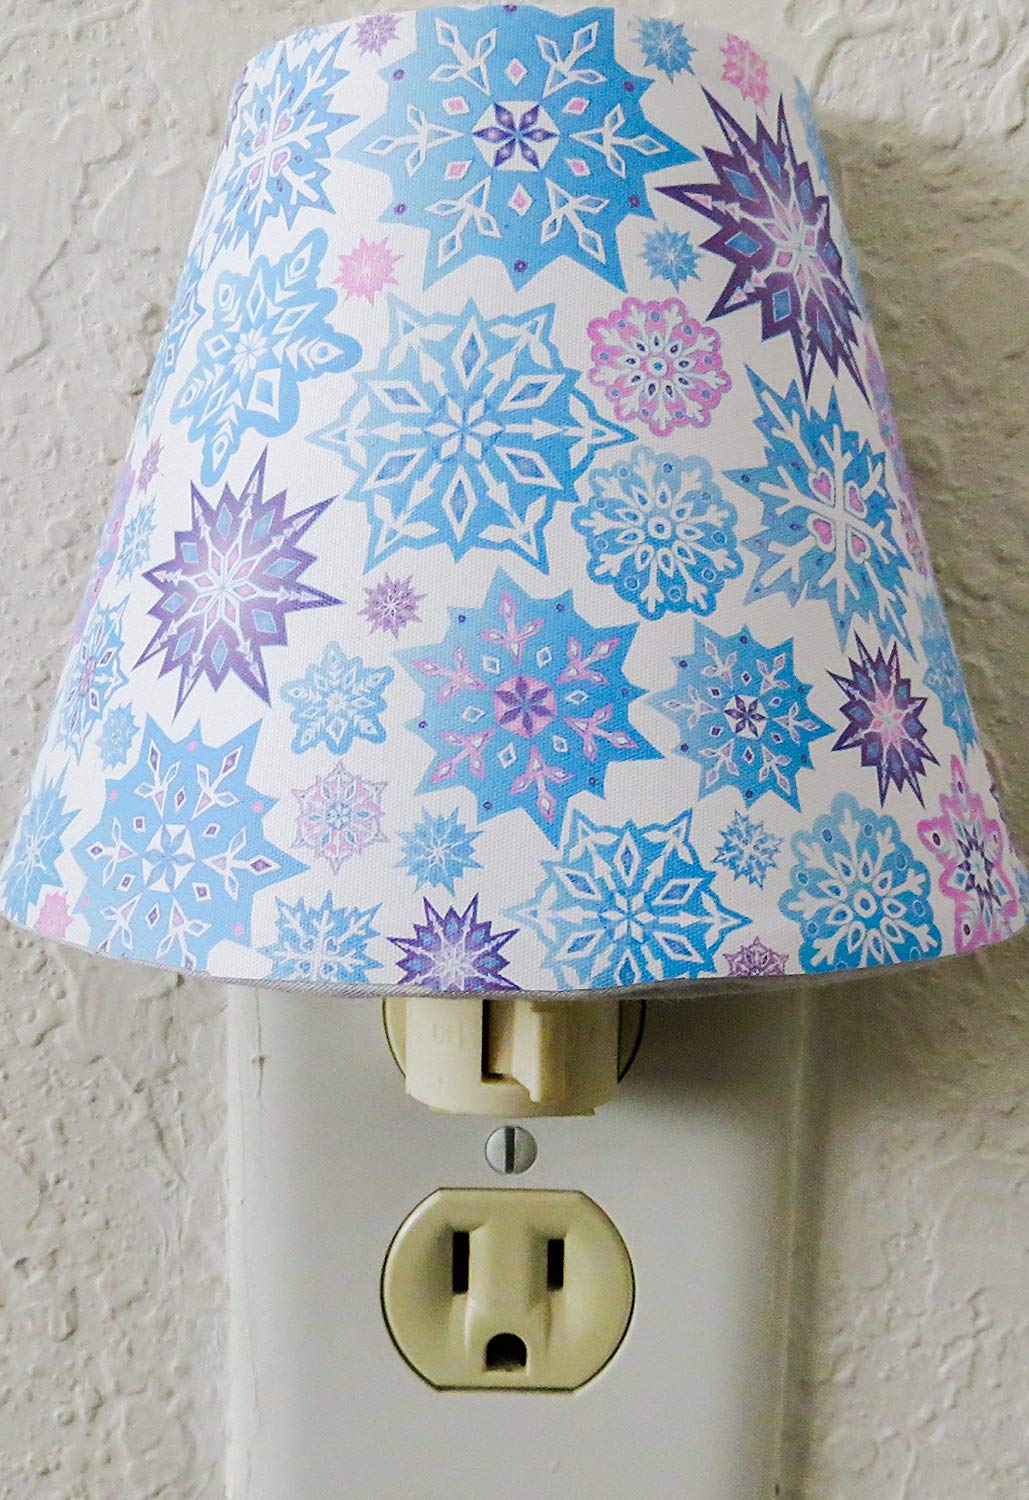 Snowflake Night Light in Pink, Purple and Blue Snowflakes Wall Decor